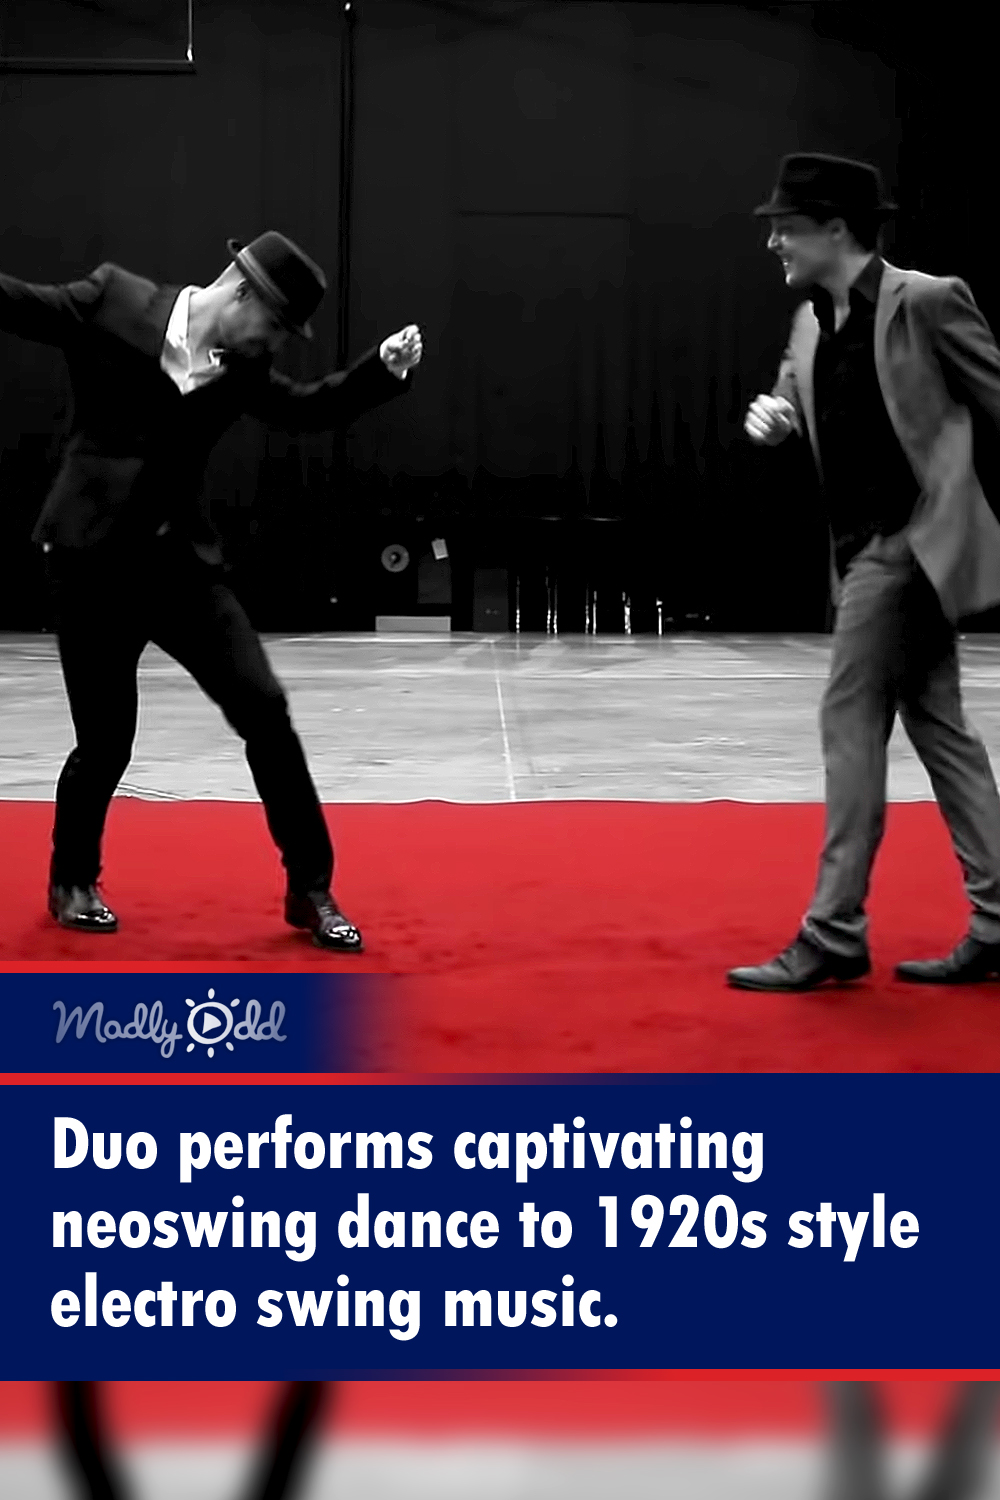 Duo performs captivating neoswing dance to 1920s style electro swing music